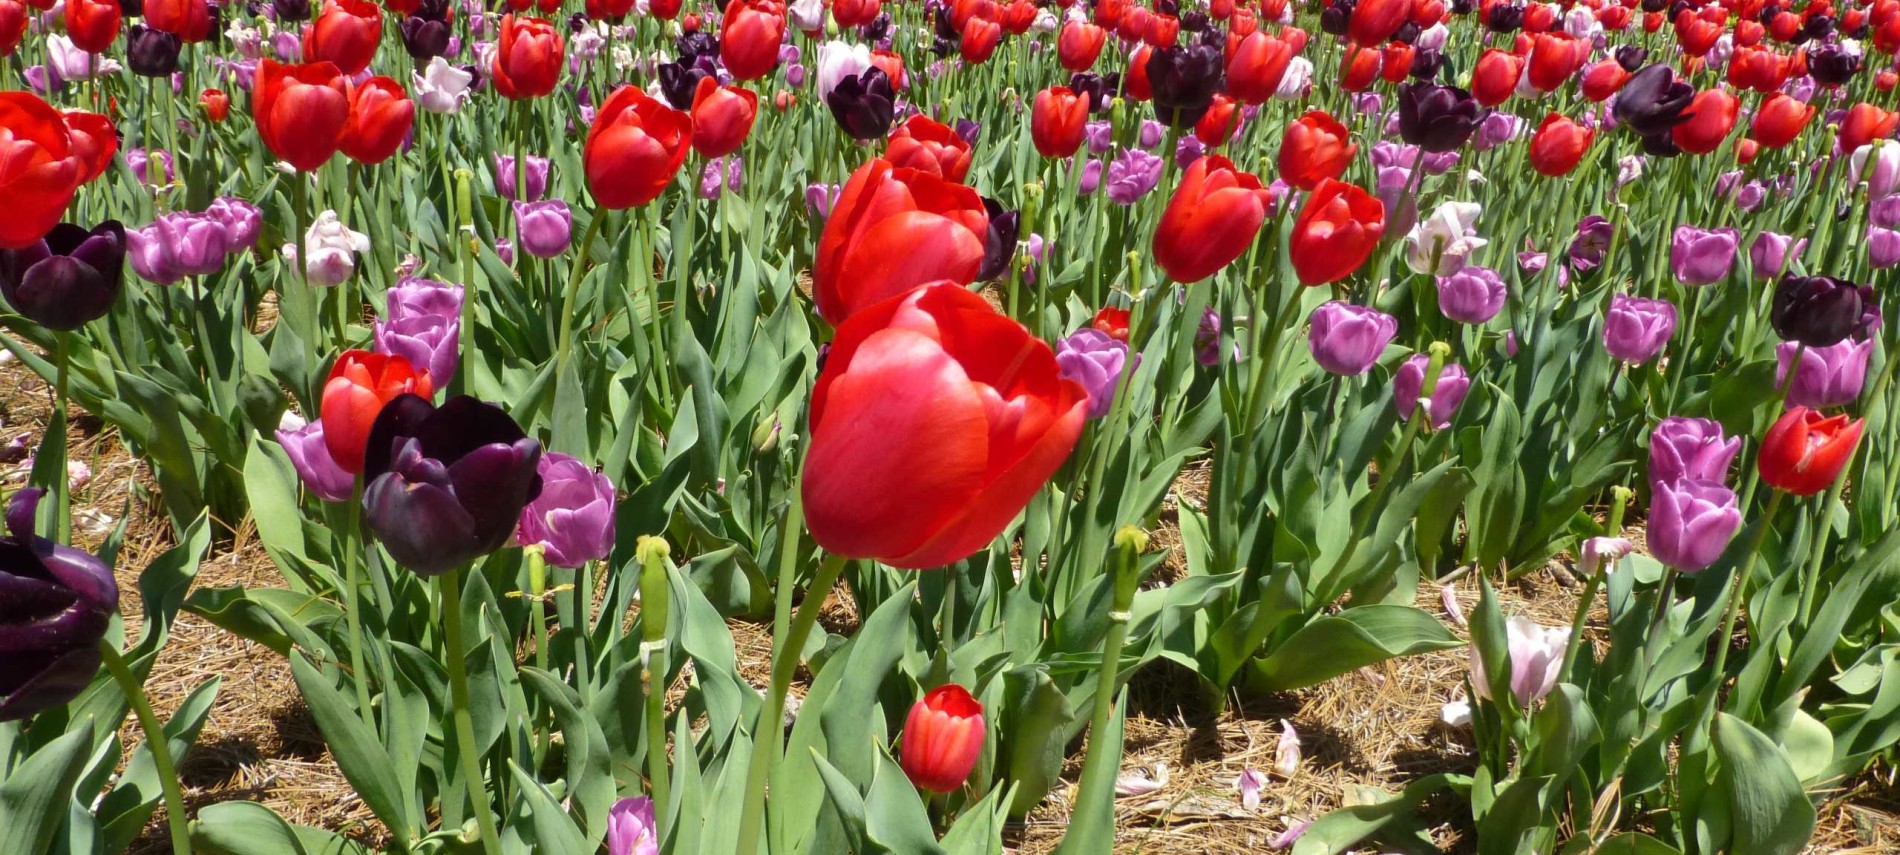 Thousands of flowering tulips in several different colors in a garden